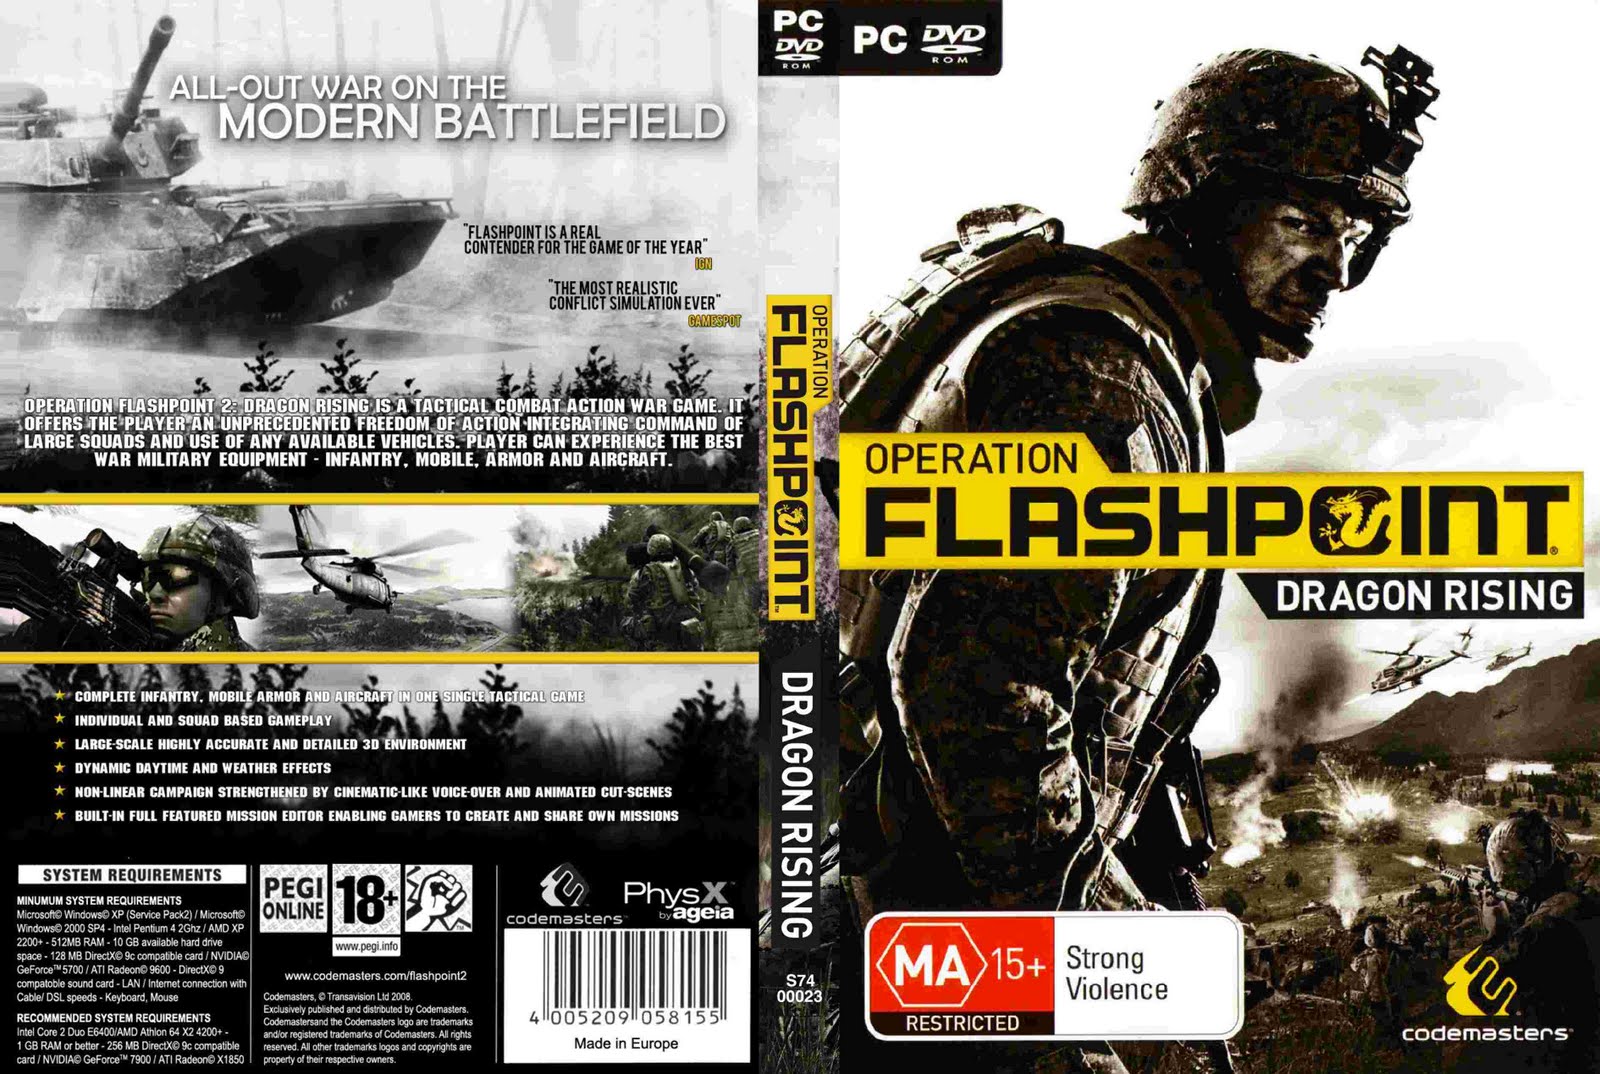 http://capasecovers.files.wordpress.com/2010/01/operationflashpointdragonrising-pc.jpg